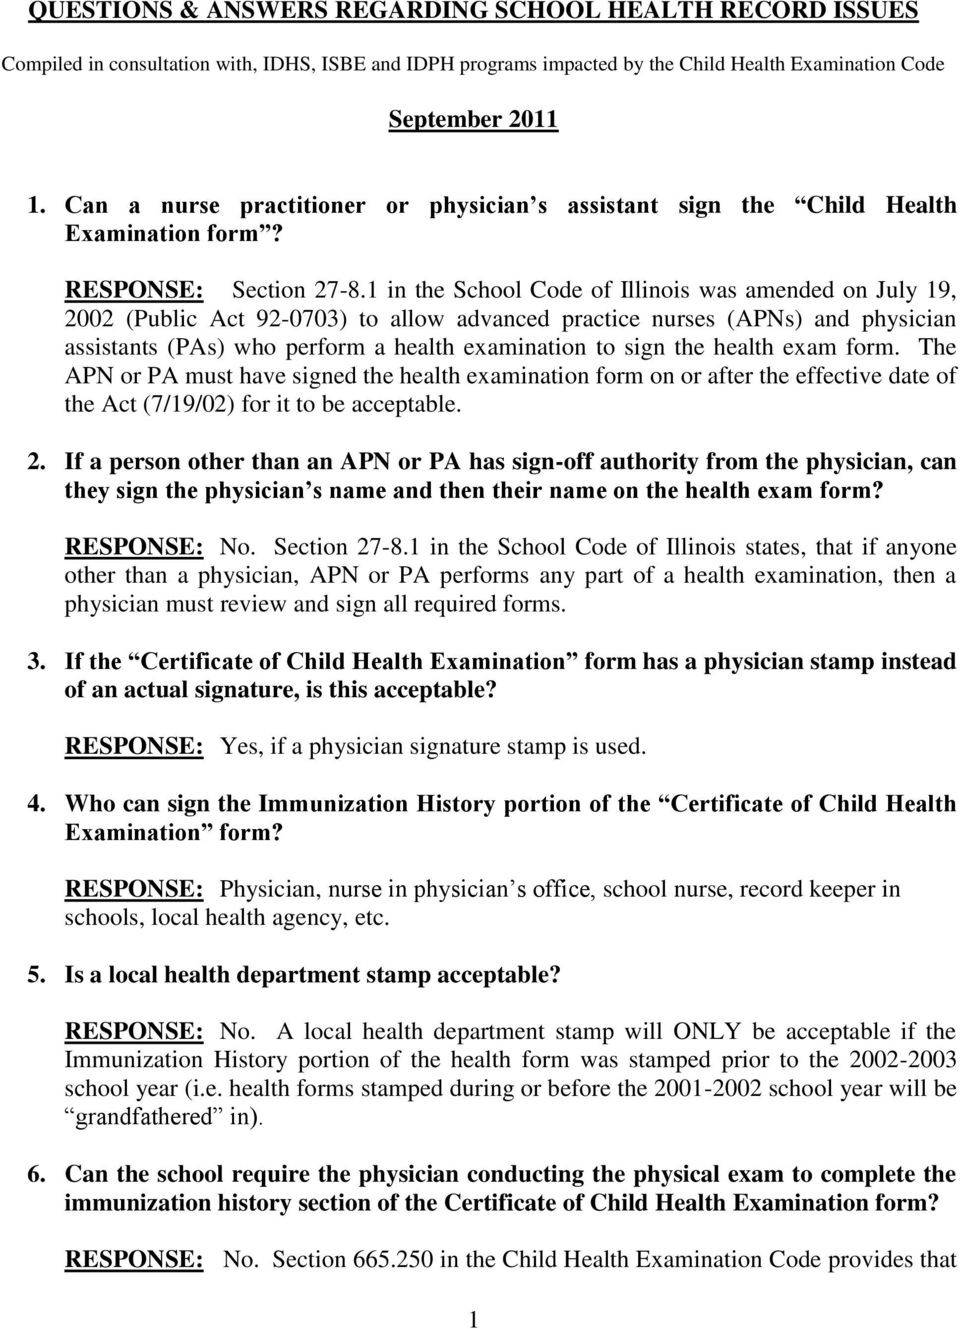 1 in the School Code of Illinois was amended on July 19, 2002 (Public Act 92-0703) to allow advanced practice nurses (APNs) and physician assistants (PAs) who perform a health examination to sign the